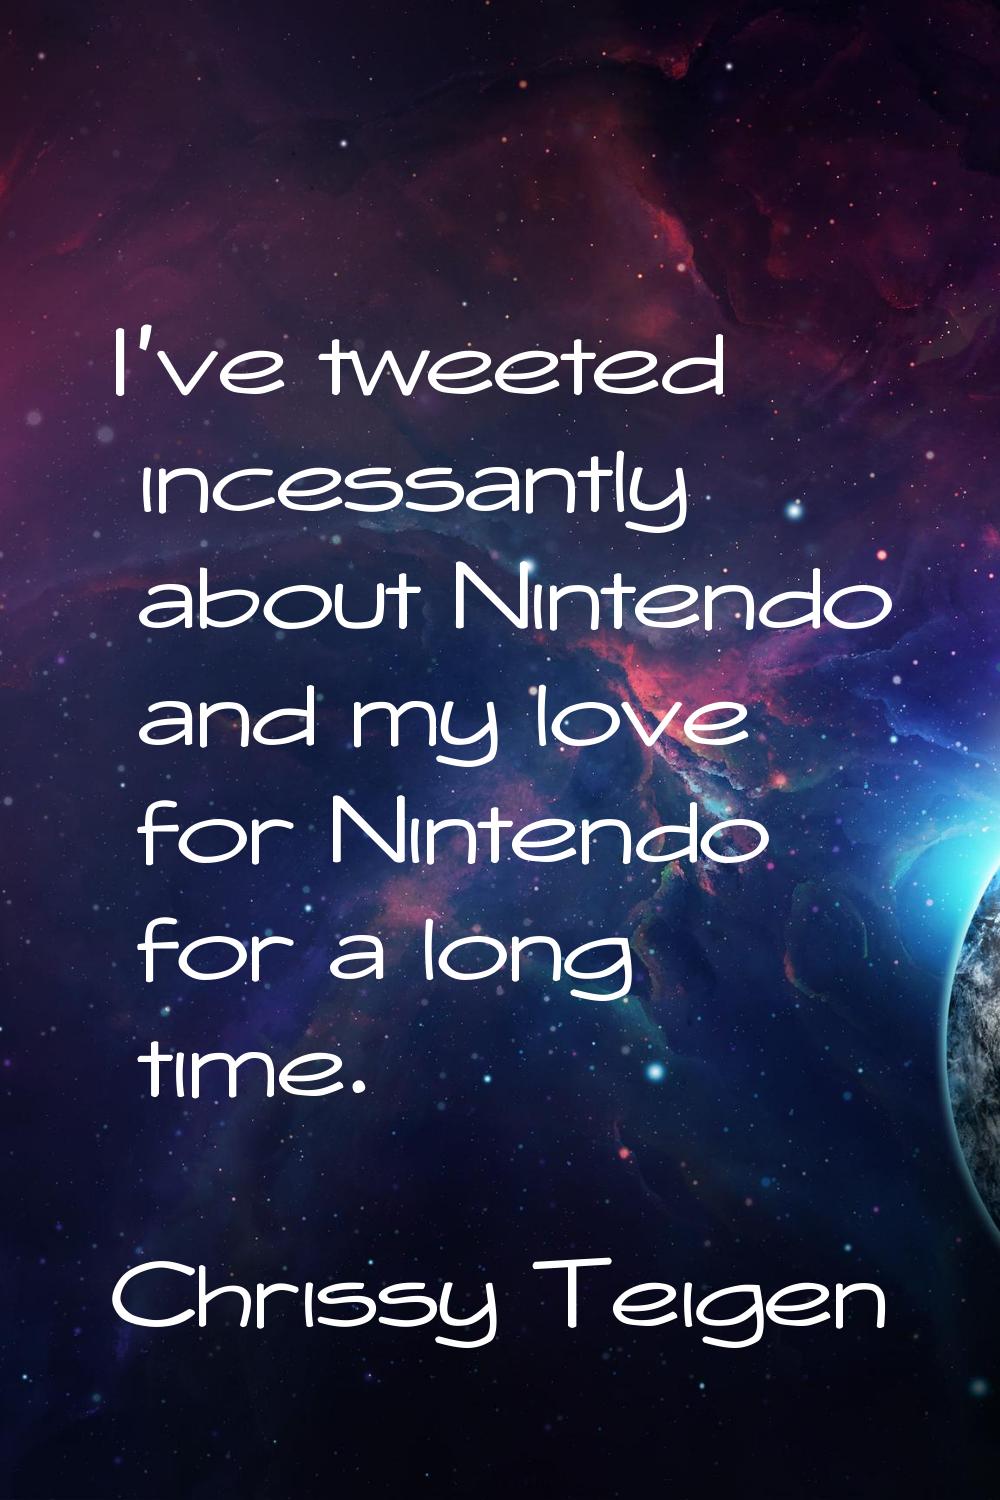 I've tweeted incessantly about Nintendo and my love for Nintendo for a long time.